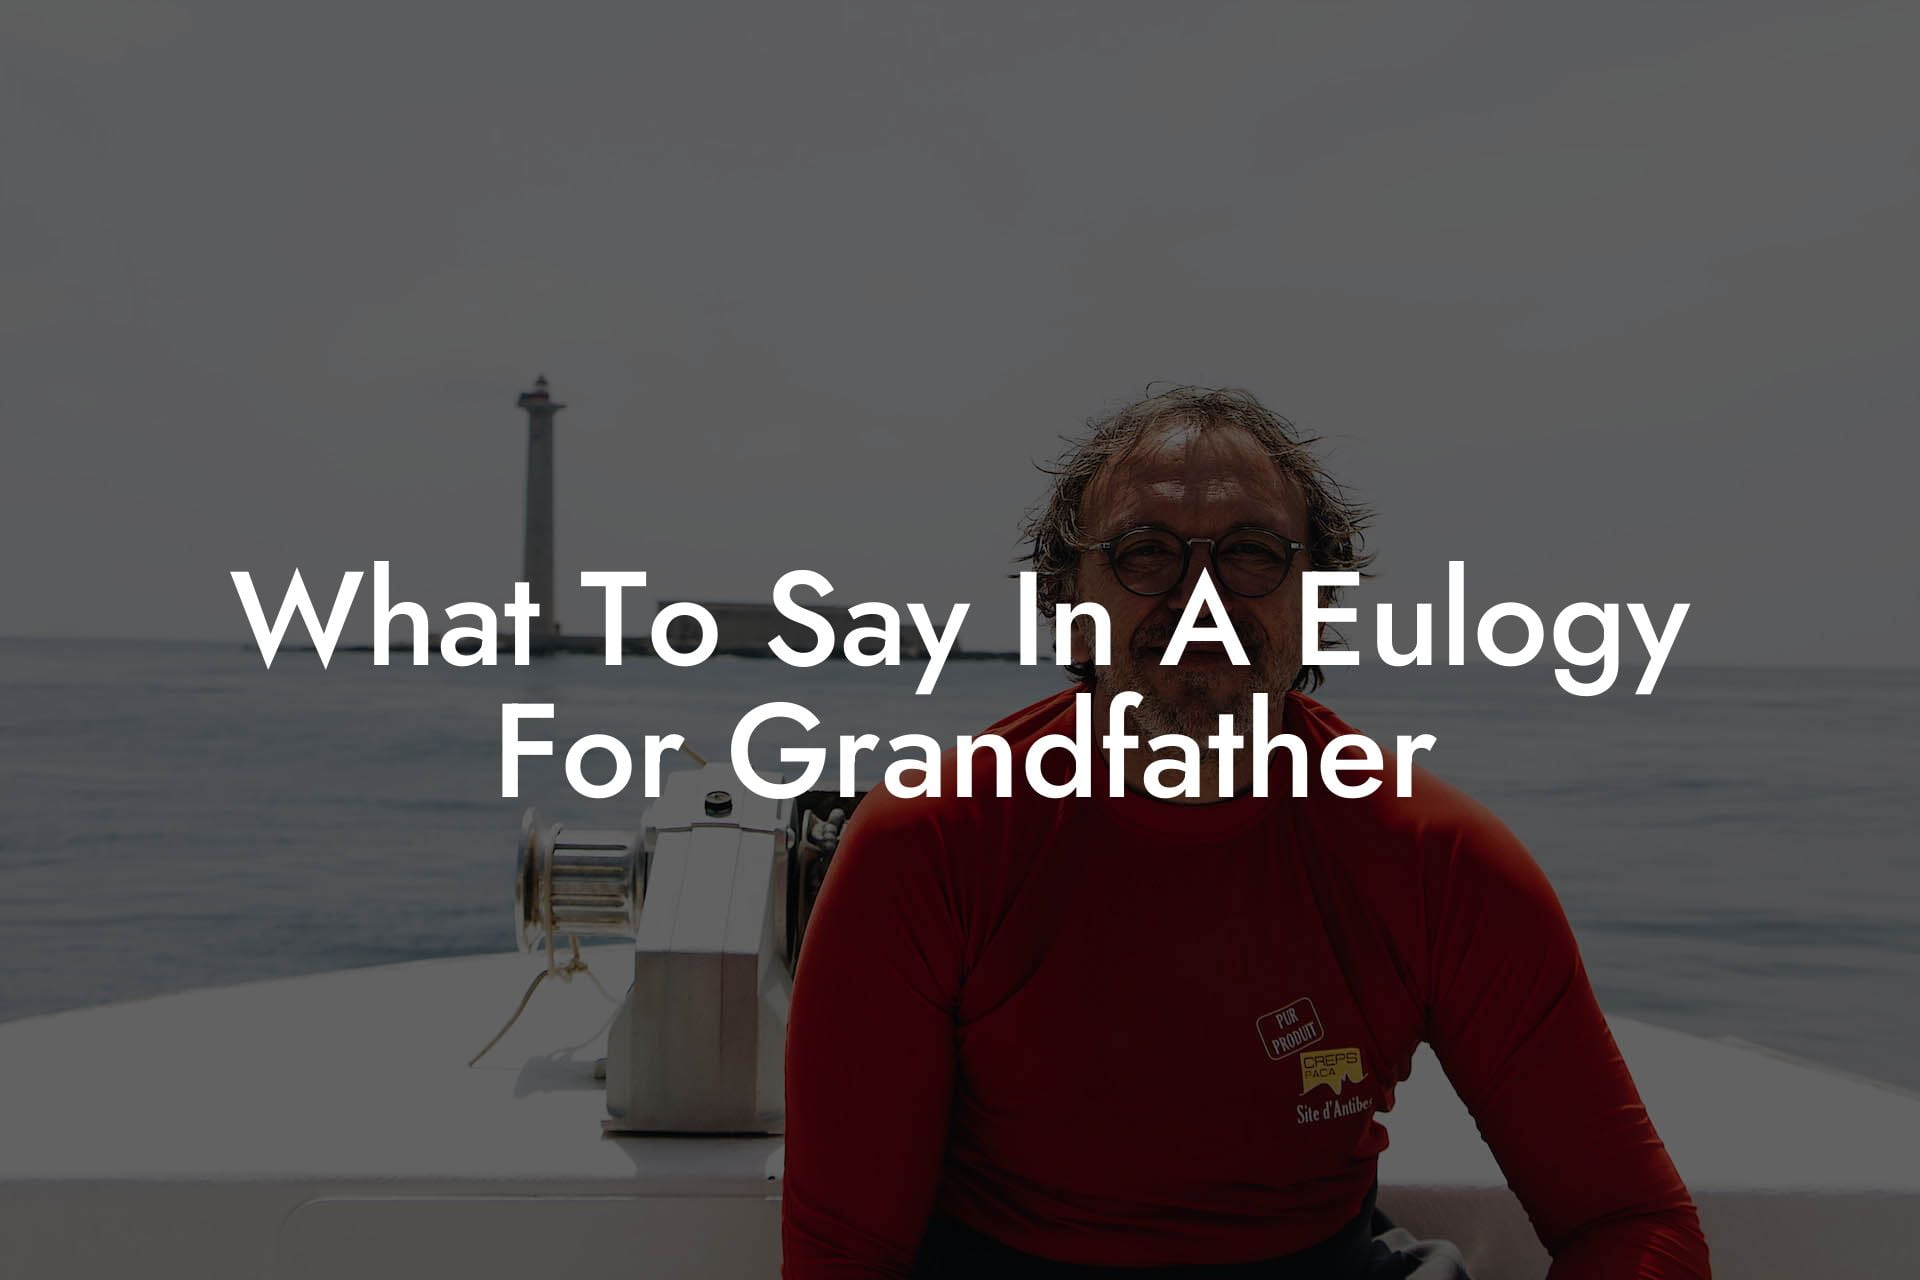 What To Say In A Eulogy For Grandfather